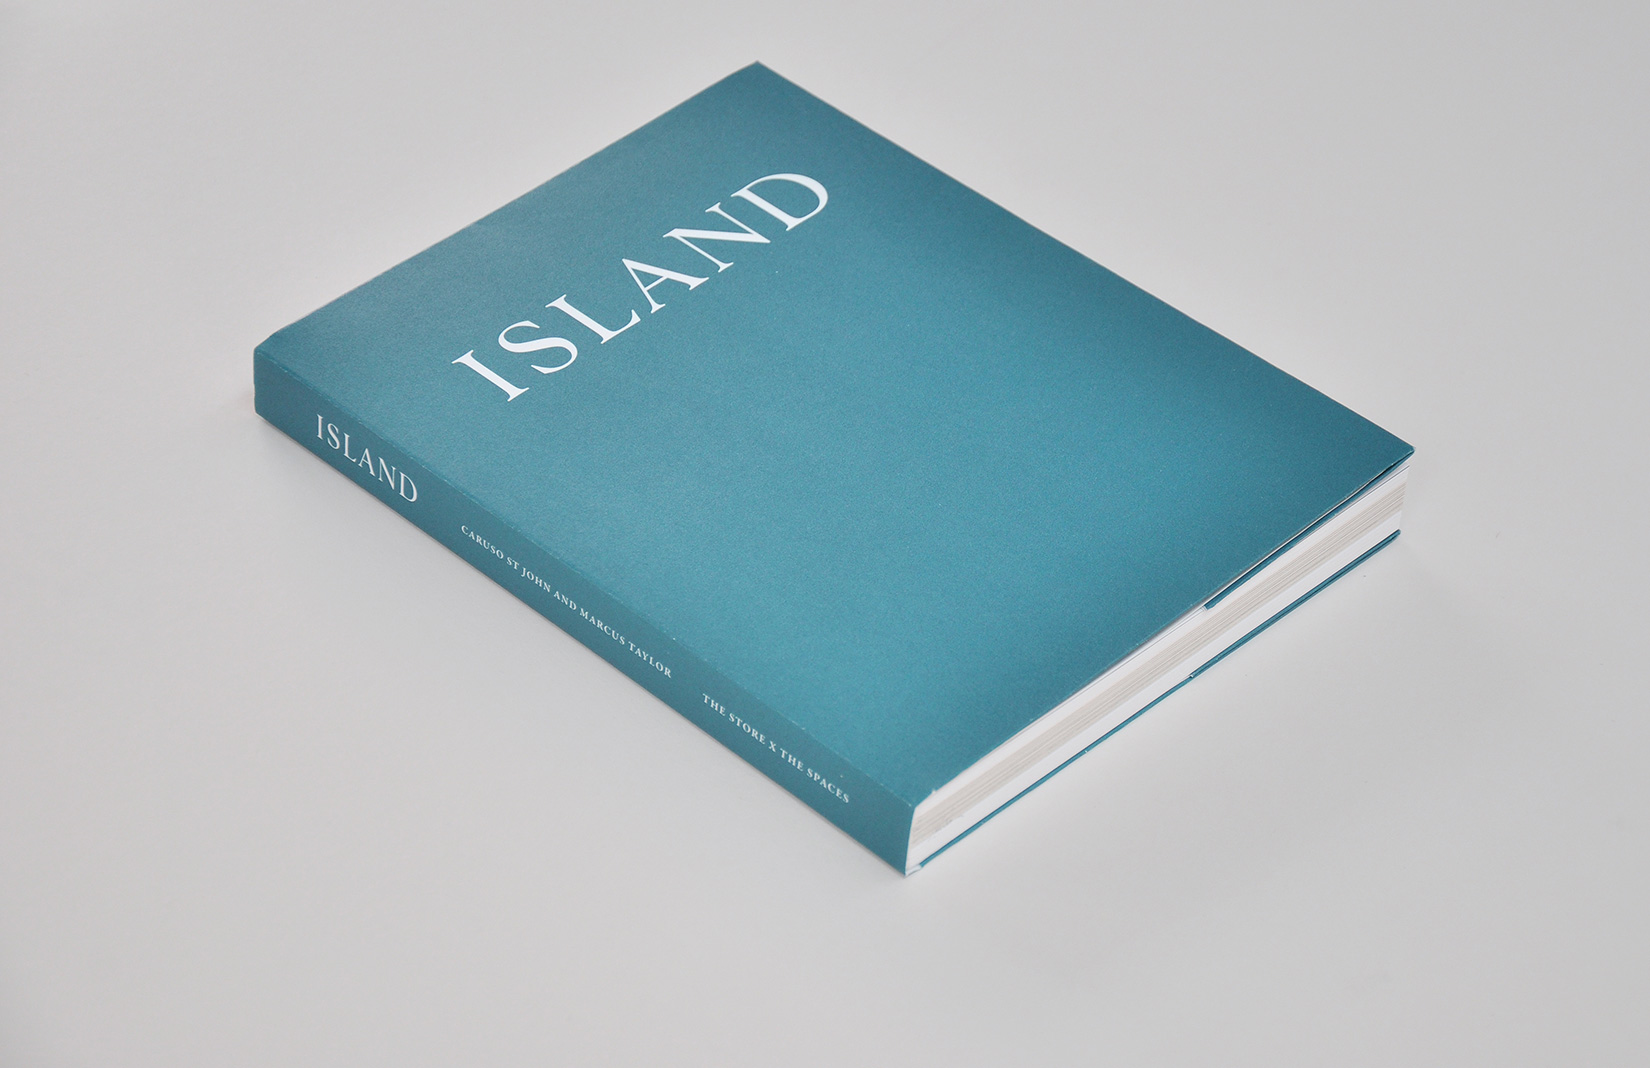 Island book by Caruso St John and Marcus Taylor